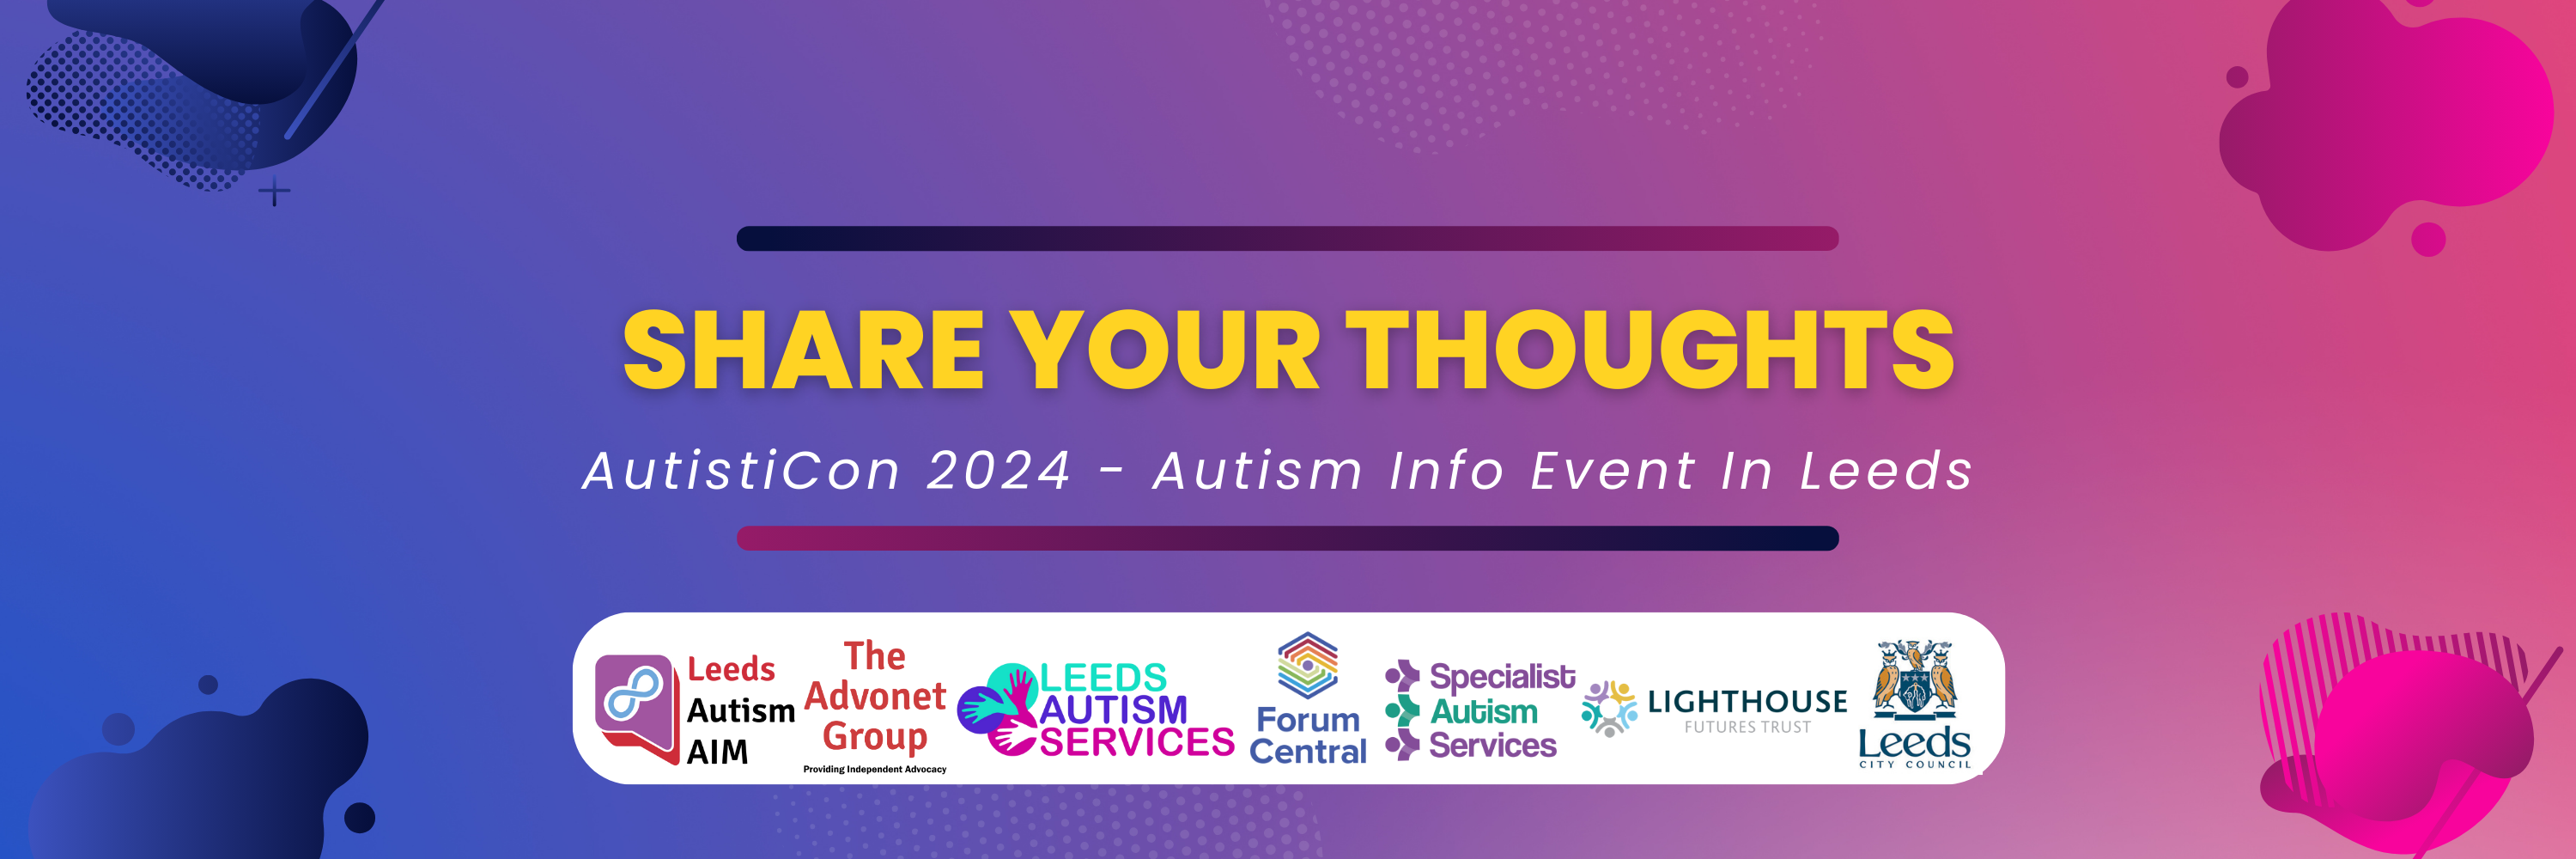 AutistiCon 2024 - Share Your Thoughts - click on this image to take our online survey